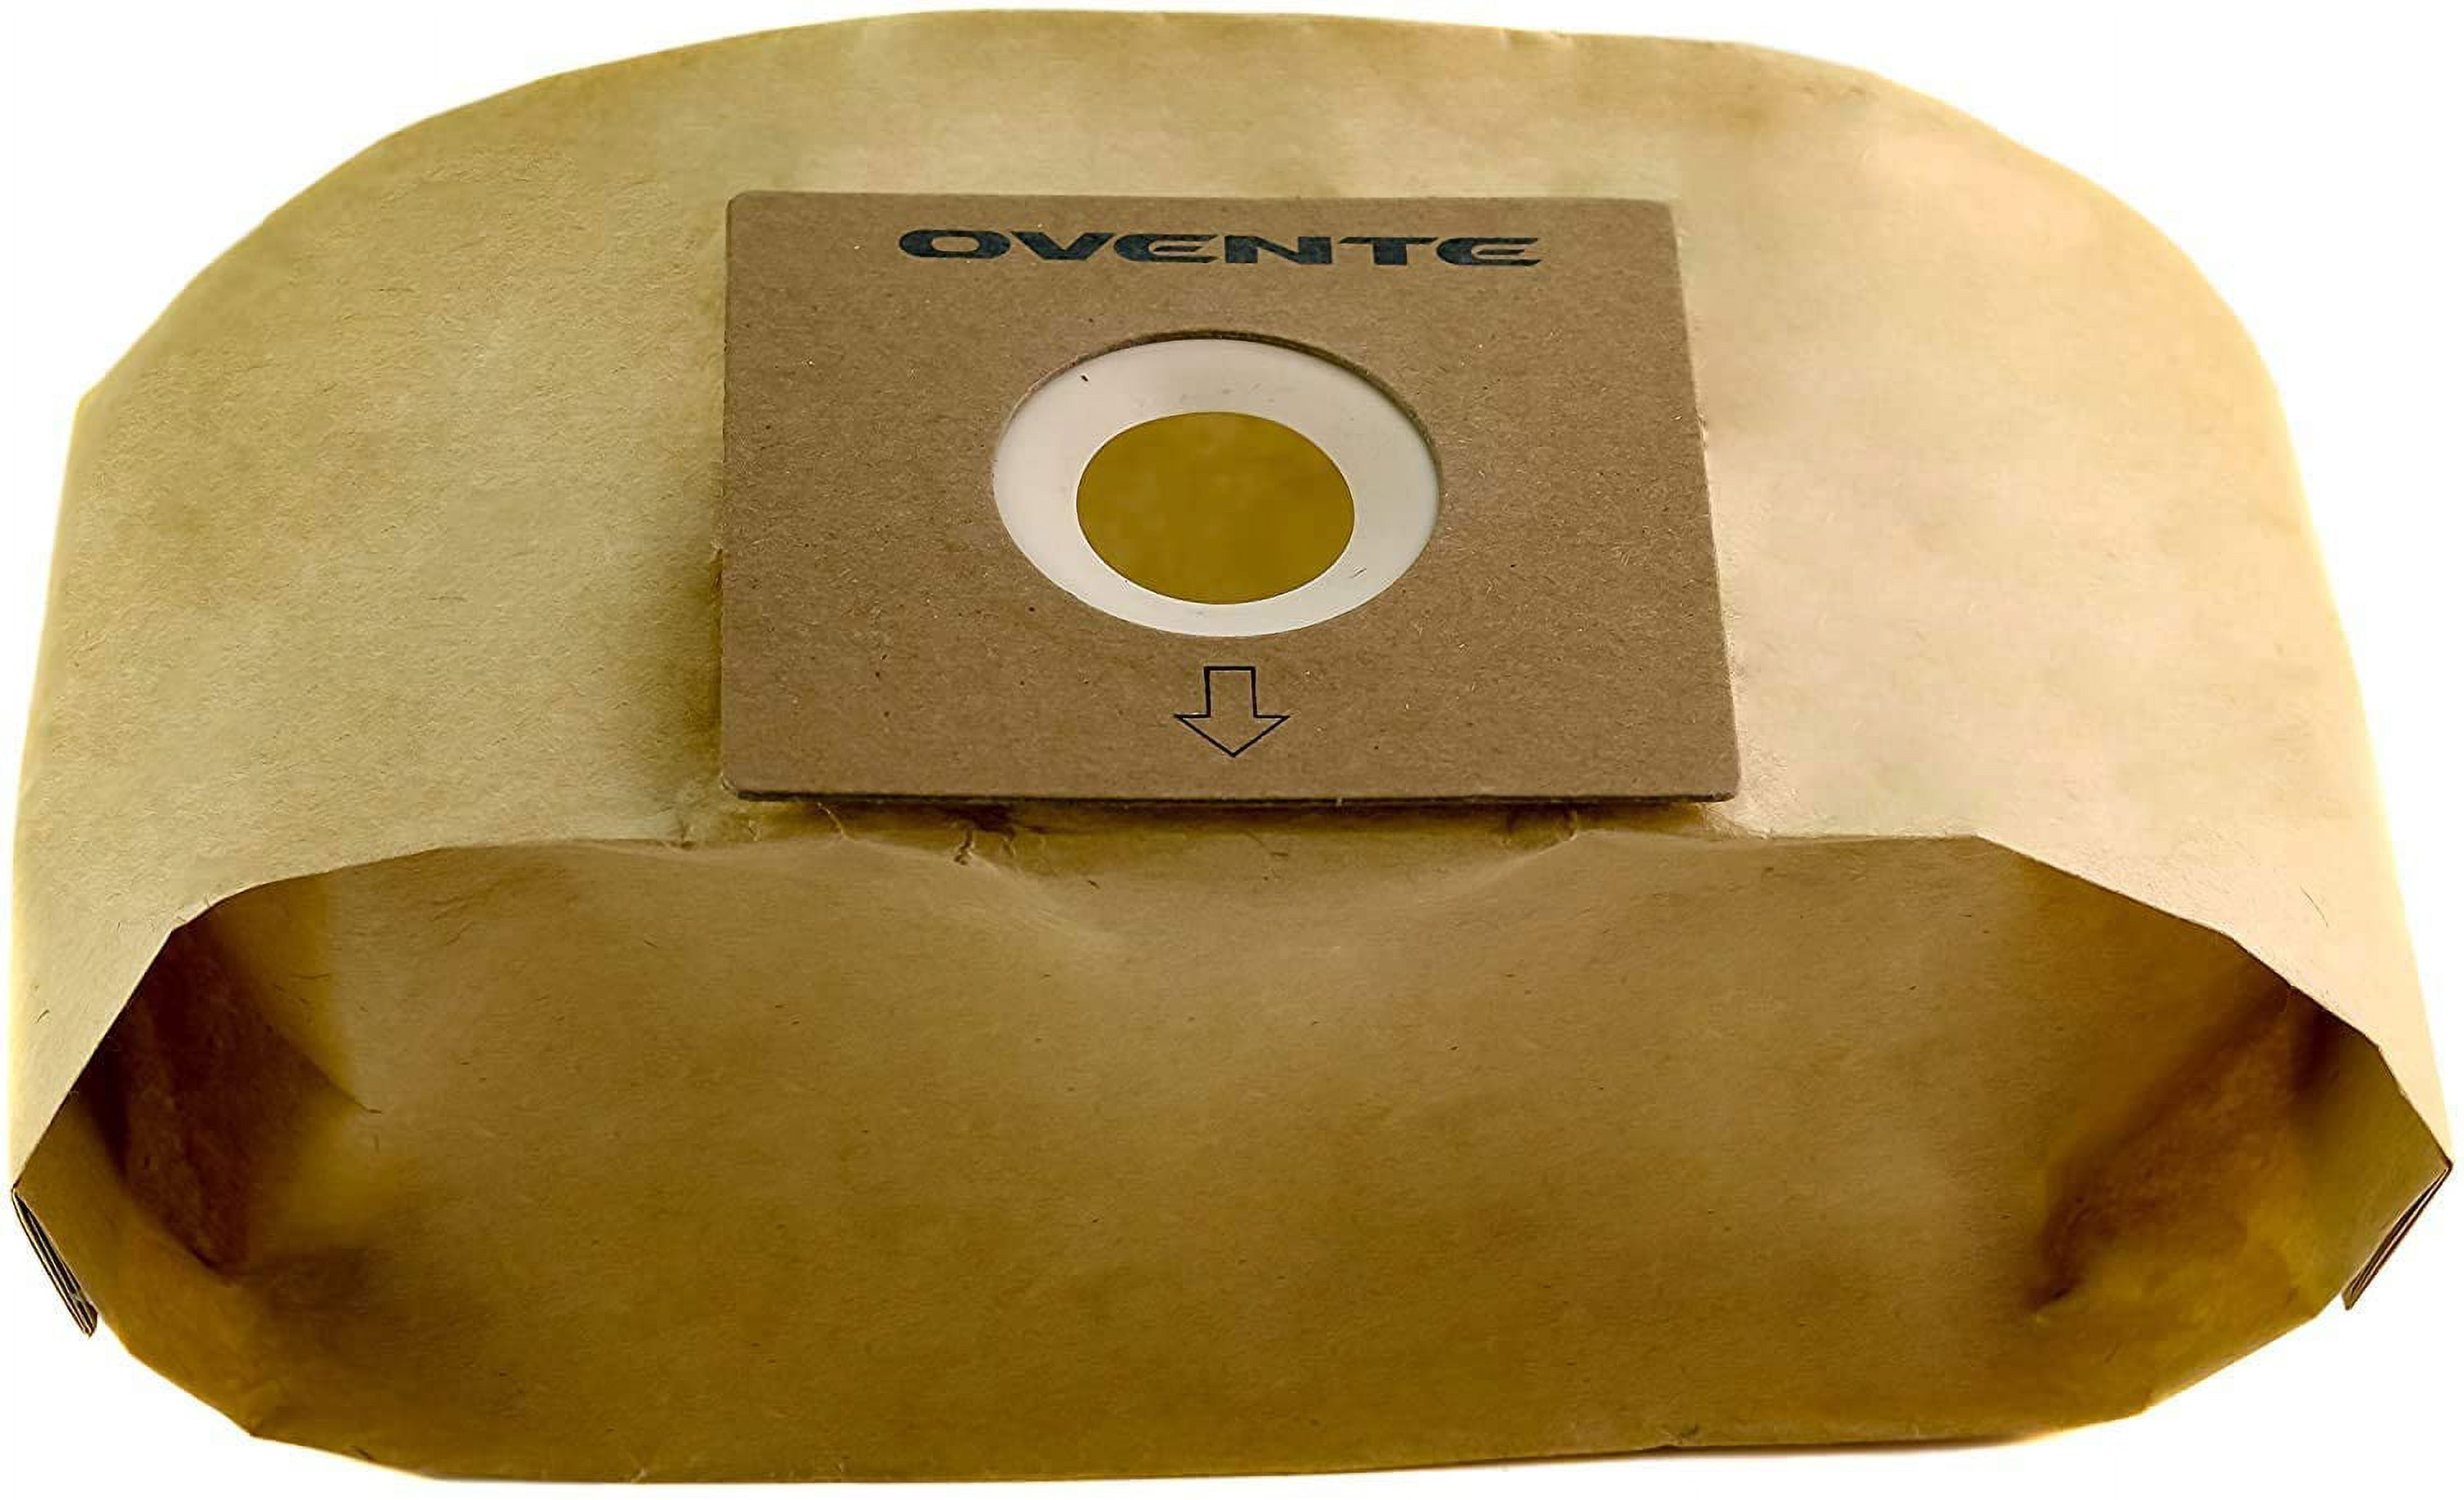 Ovente 4-Pack Premium Disposable Compact Dust Bag Replacement with Ultra Filtration, Fit for ST1600 Canister Vacuum Cleaner Model Series Large Size and Easy Storage, Brown ACPST16704 - image 4 of 7